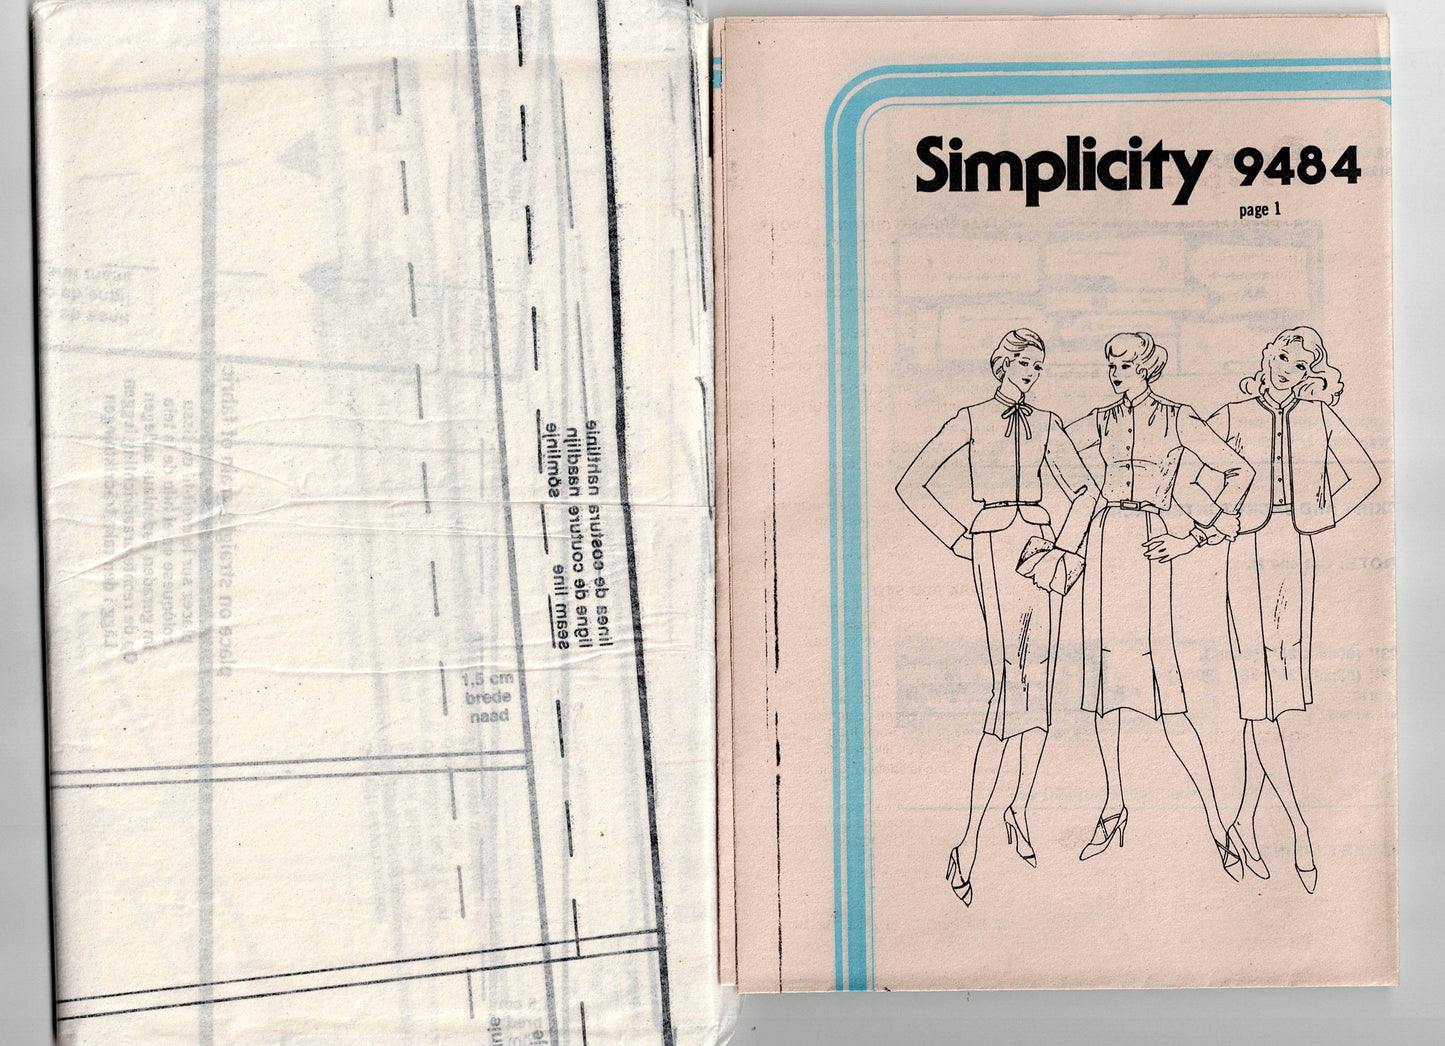 Simplicity 9484 Womens Lined Jacket Blouse & Skirt 1980s Vintage Sewing Pattern Size 14 Bust 36 inches